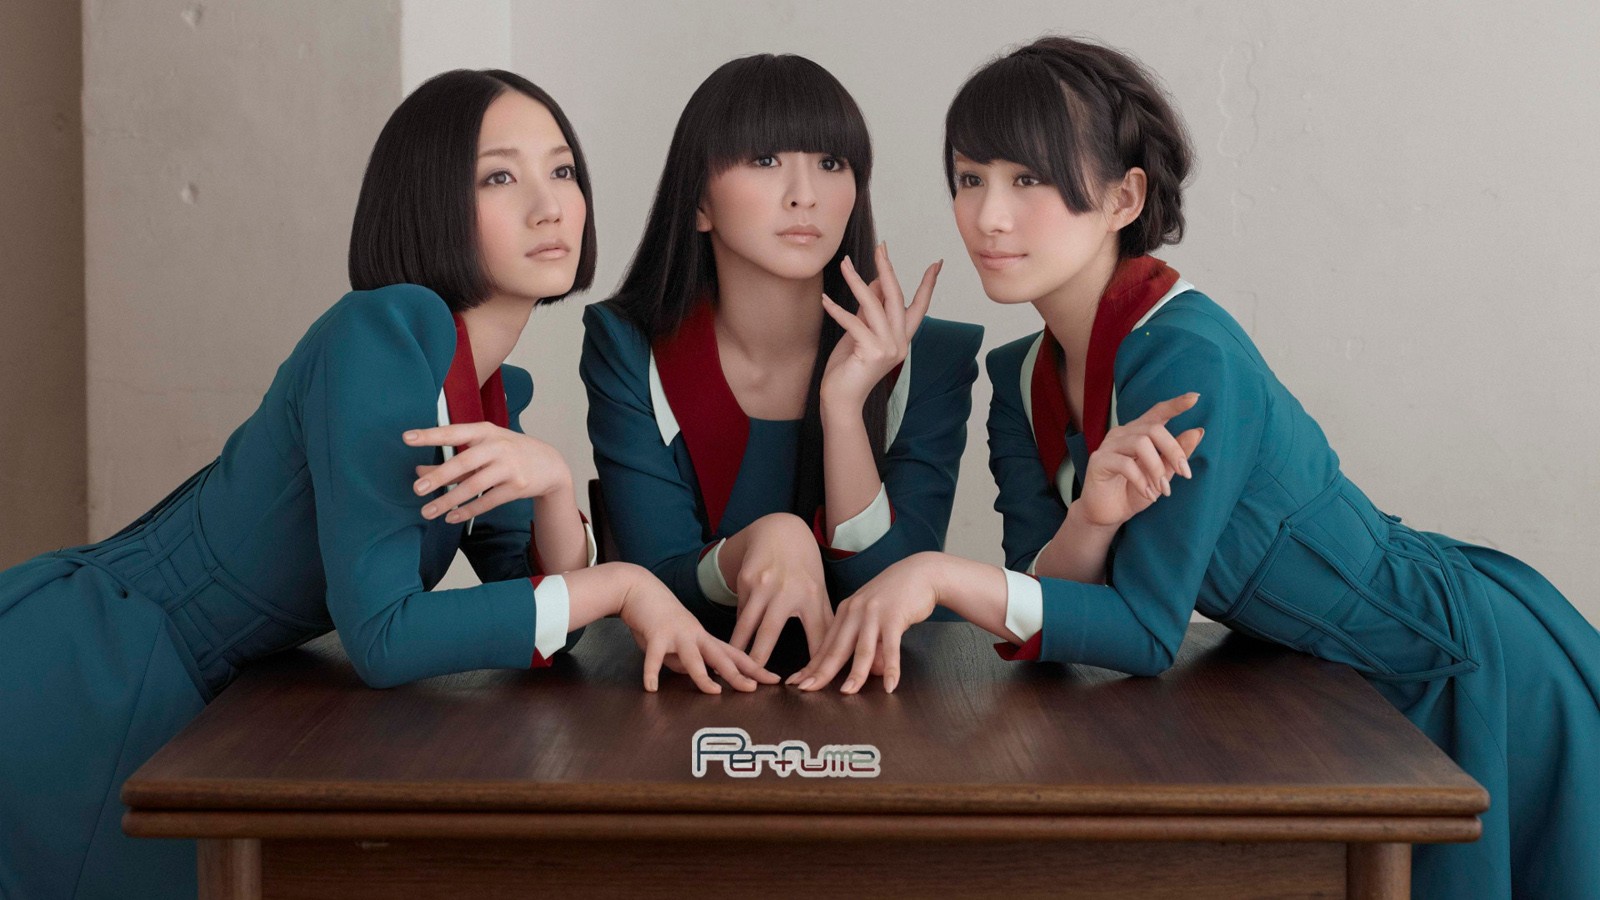 Perfume Band Hd Wallpapers Free Desktop Images And Photos